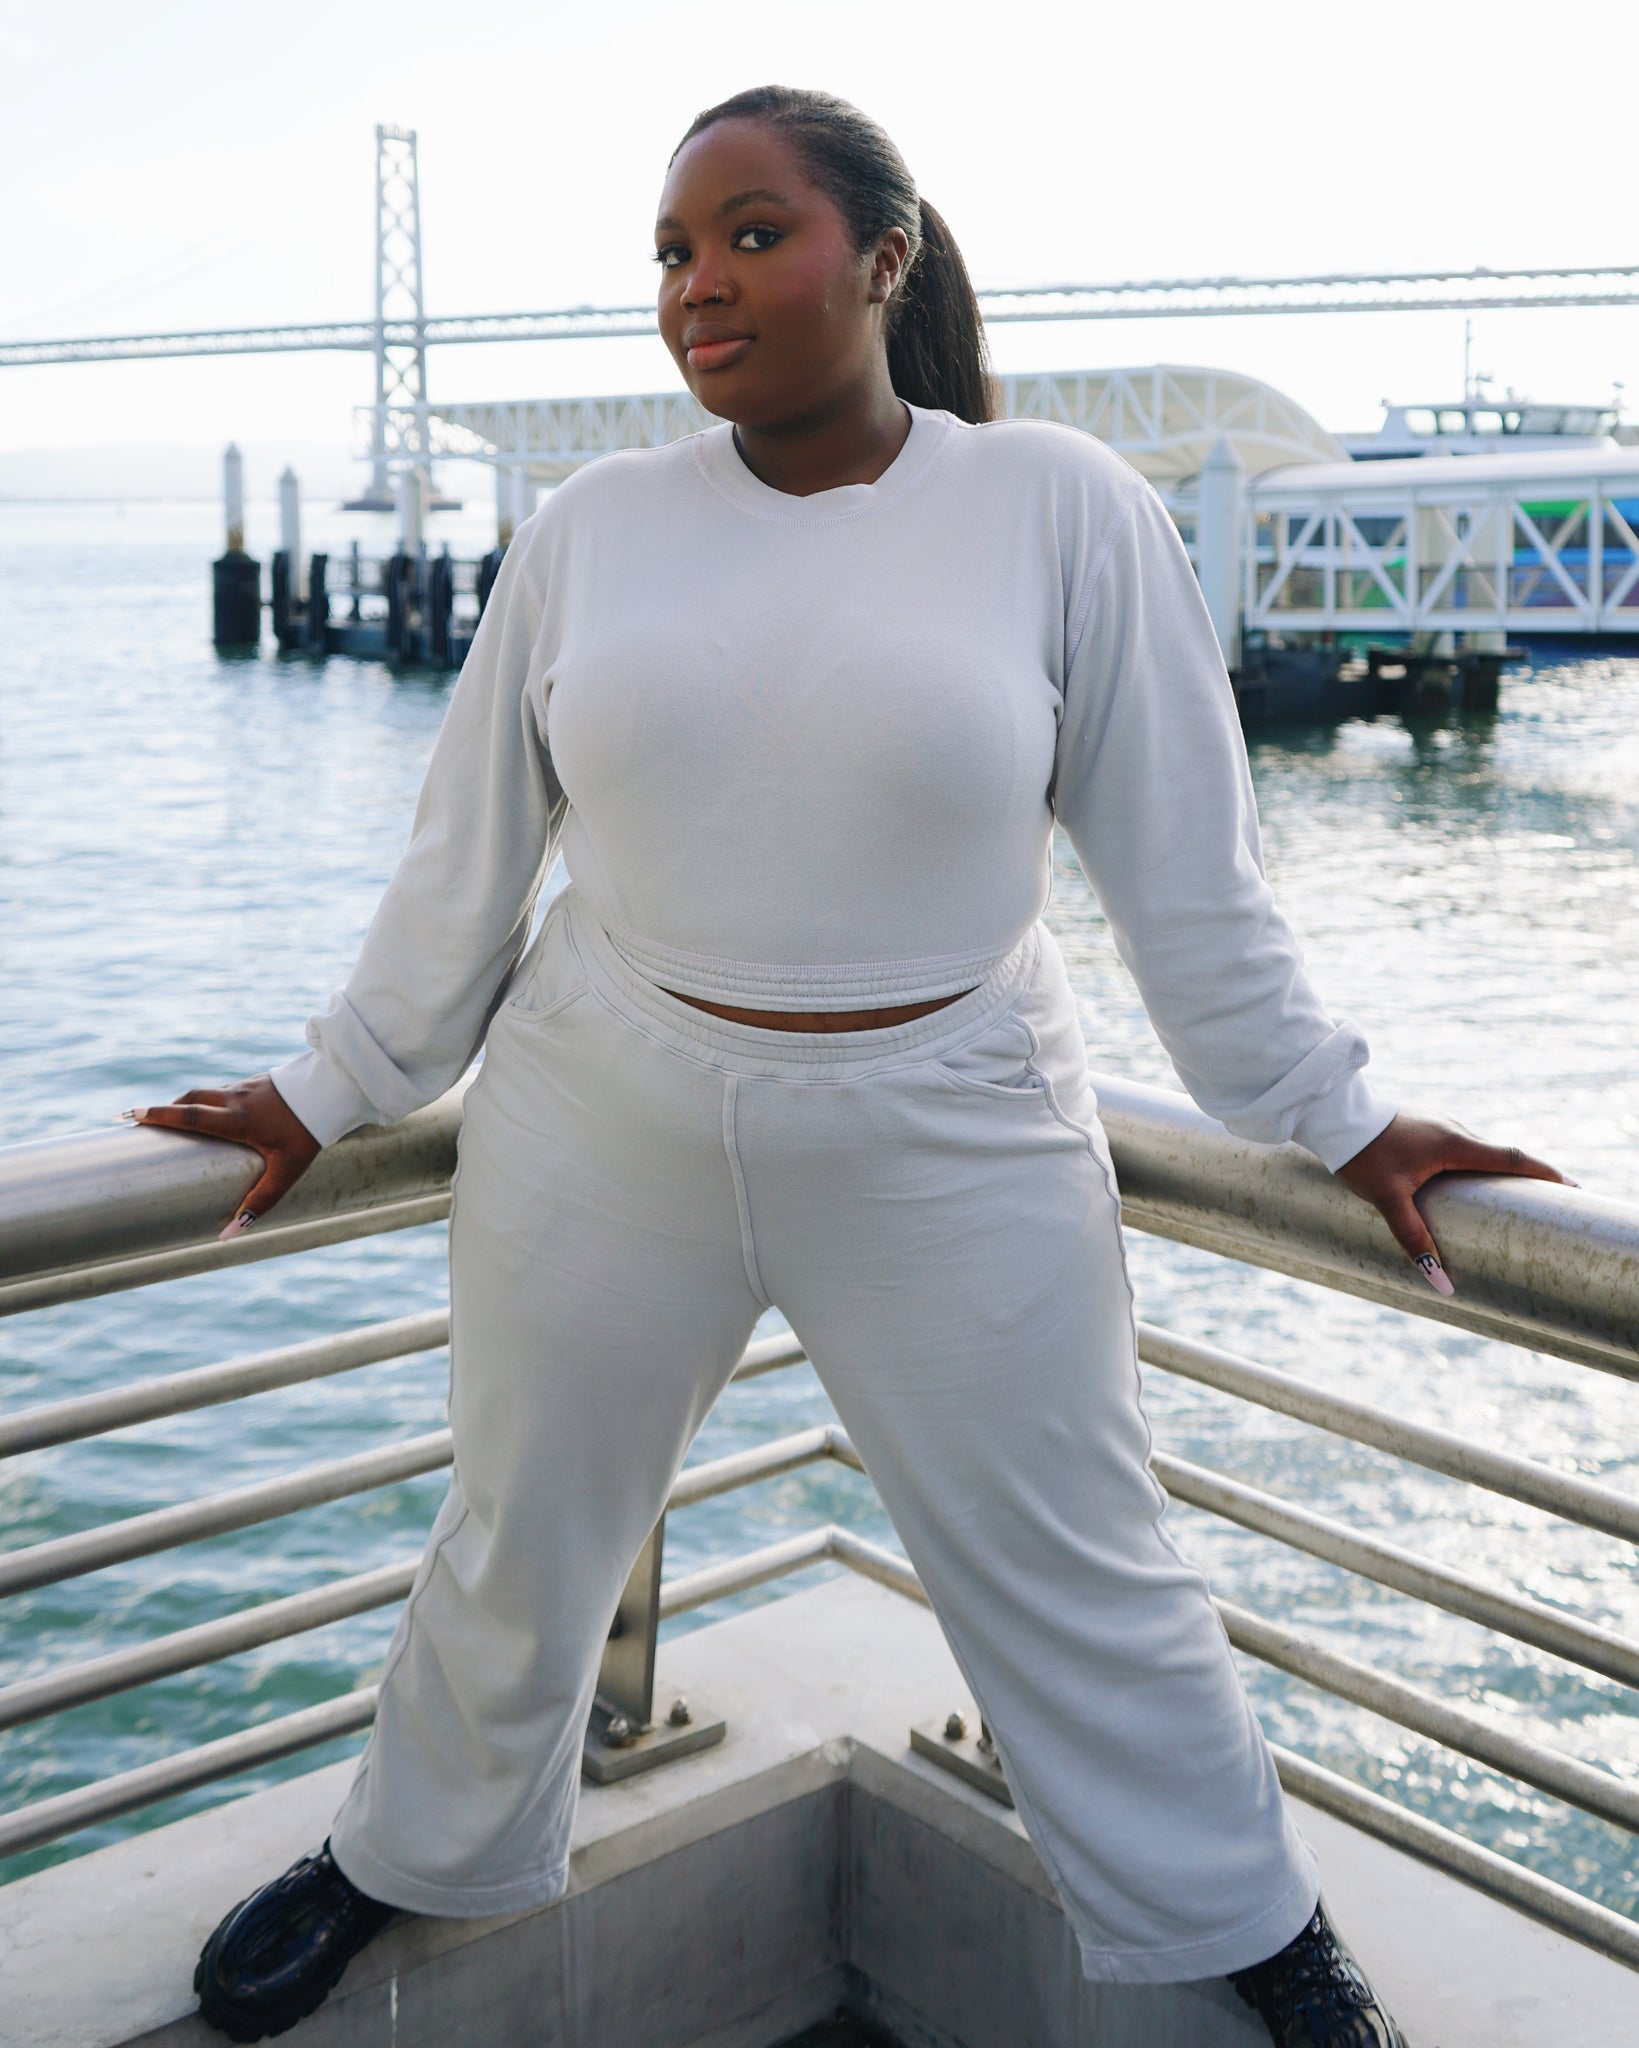 Kiara, a young Black woman is wearing the Fog Grey colored Wide Leg Pants, the Cropped Sweatshirt, and black shoes. She raised herself on a corner of the concrete barrier and is holding onto the metal fence. In the background is the Oakland Bay Bridge, ferry building, and the Bay.